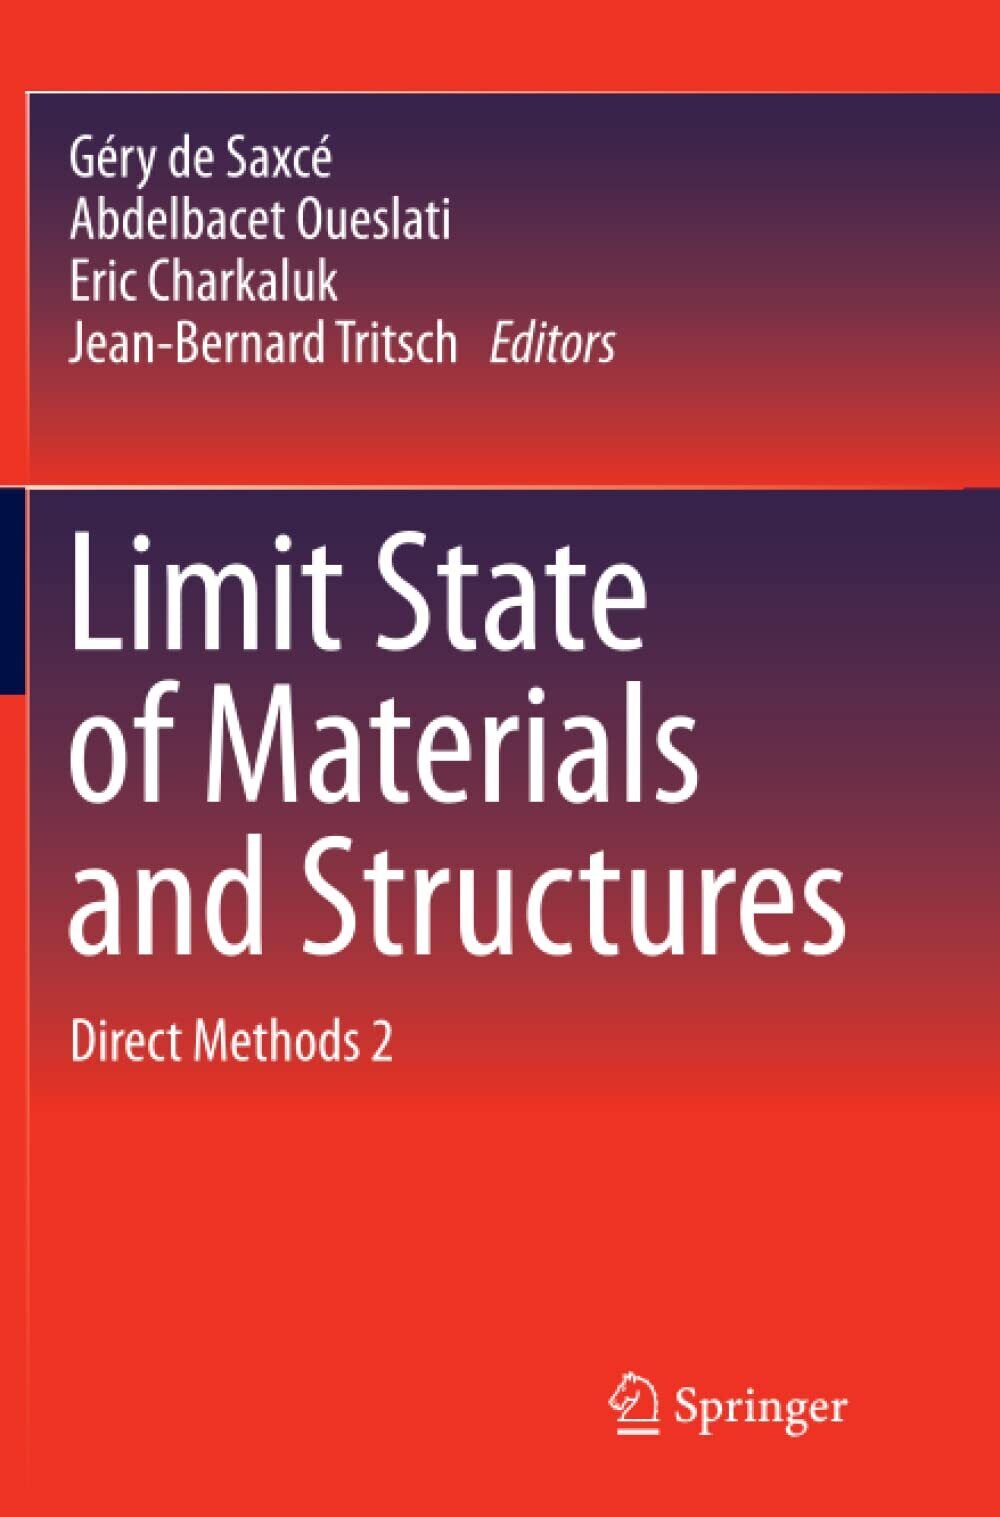 Limit State of Materials and Structures - G?ry de Saxc? - Springer, 2014